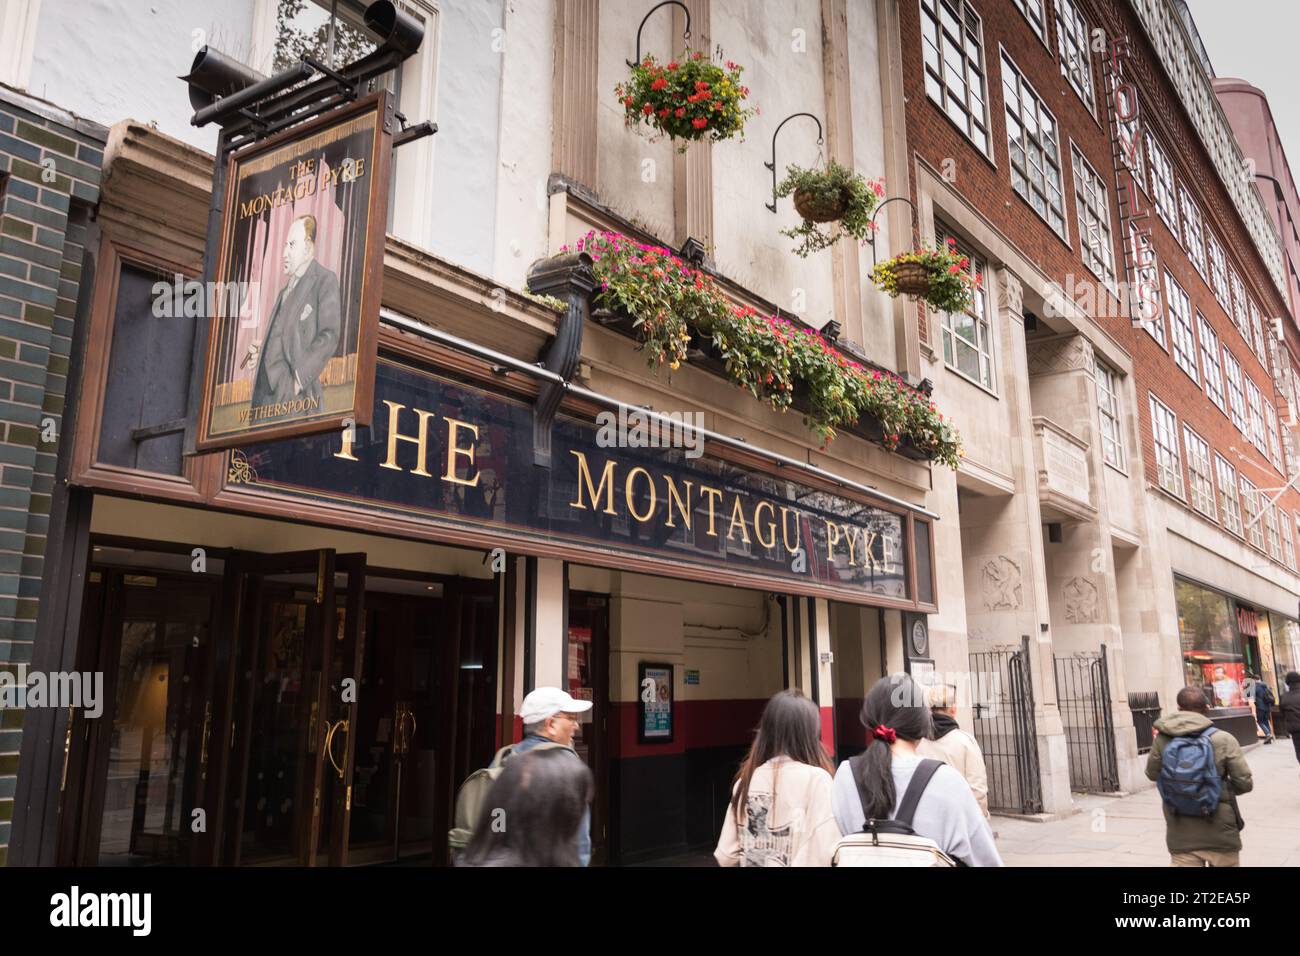 Tourists walking past the Montague Pyke public house, a pub belonging to Wetherspoons chain, on Charing Cross Road, Soho, London, WC2, England, U.K. Stock Photo